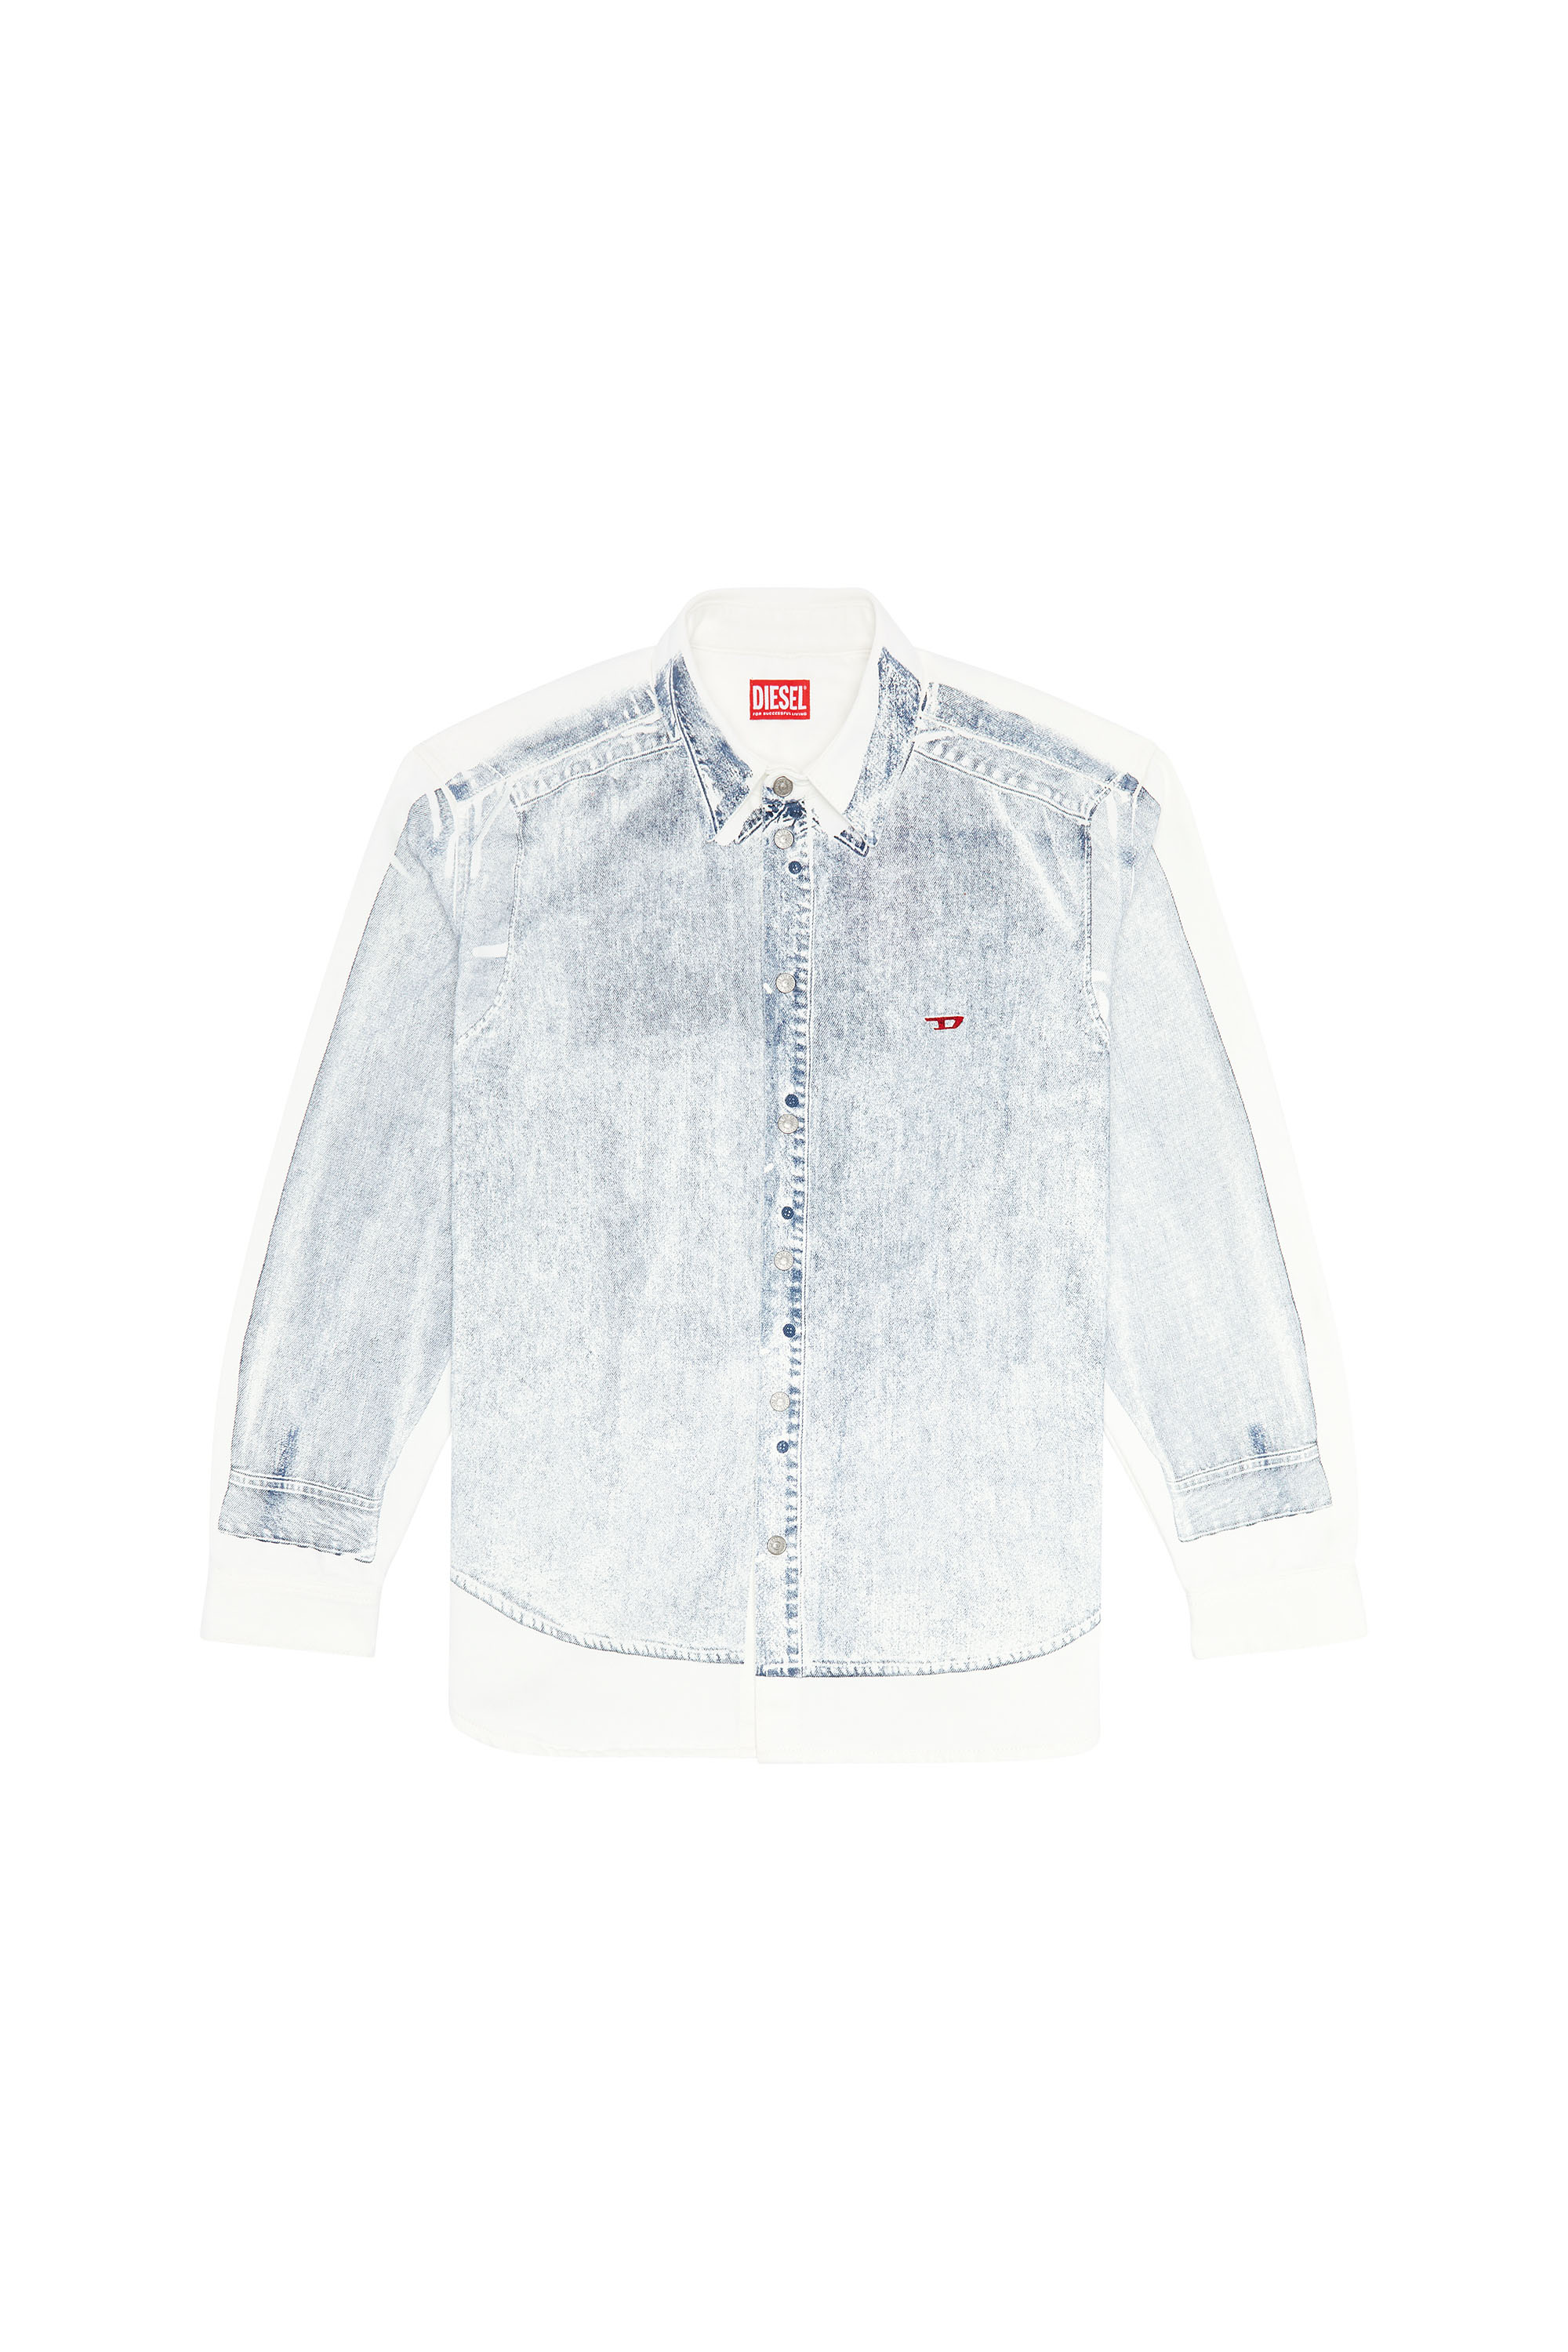 Diesel - D-SIMPLY-OVER-S, Man Denim shirt with trompe l'oeil print in Multicolor - Image 3